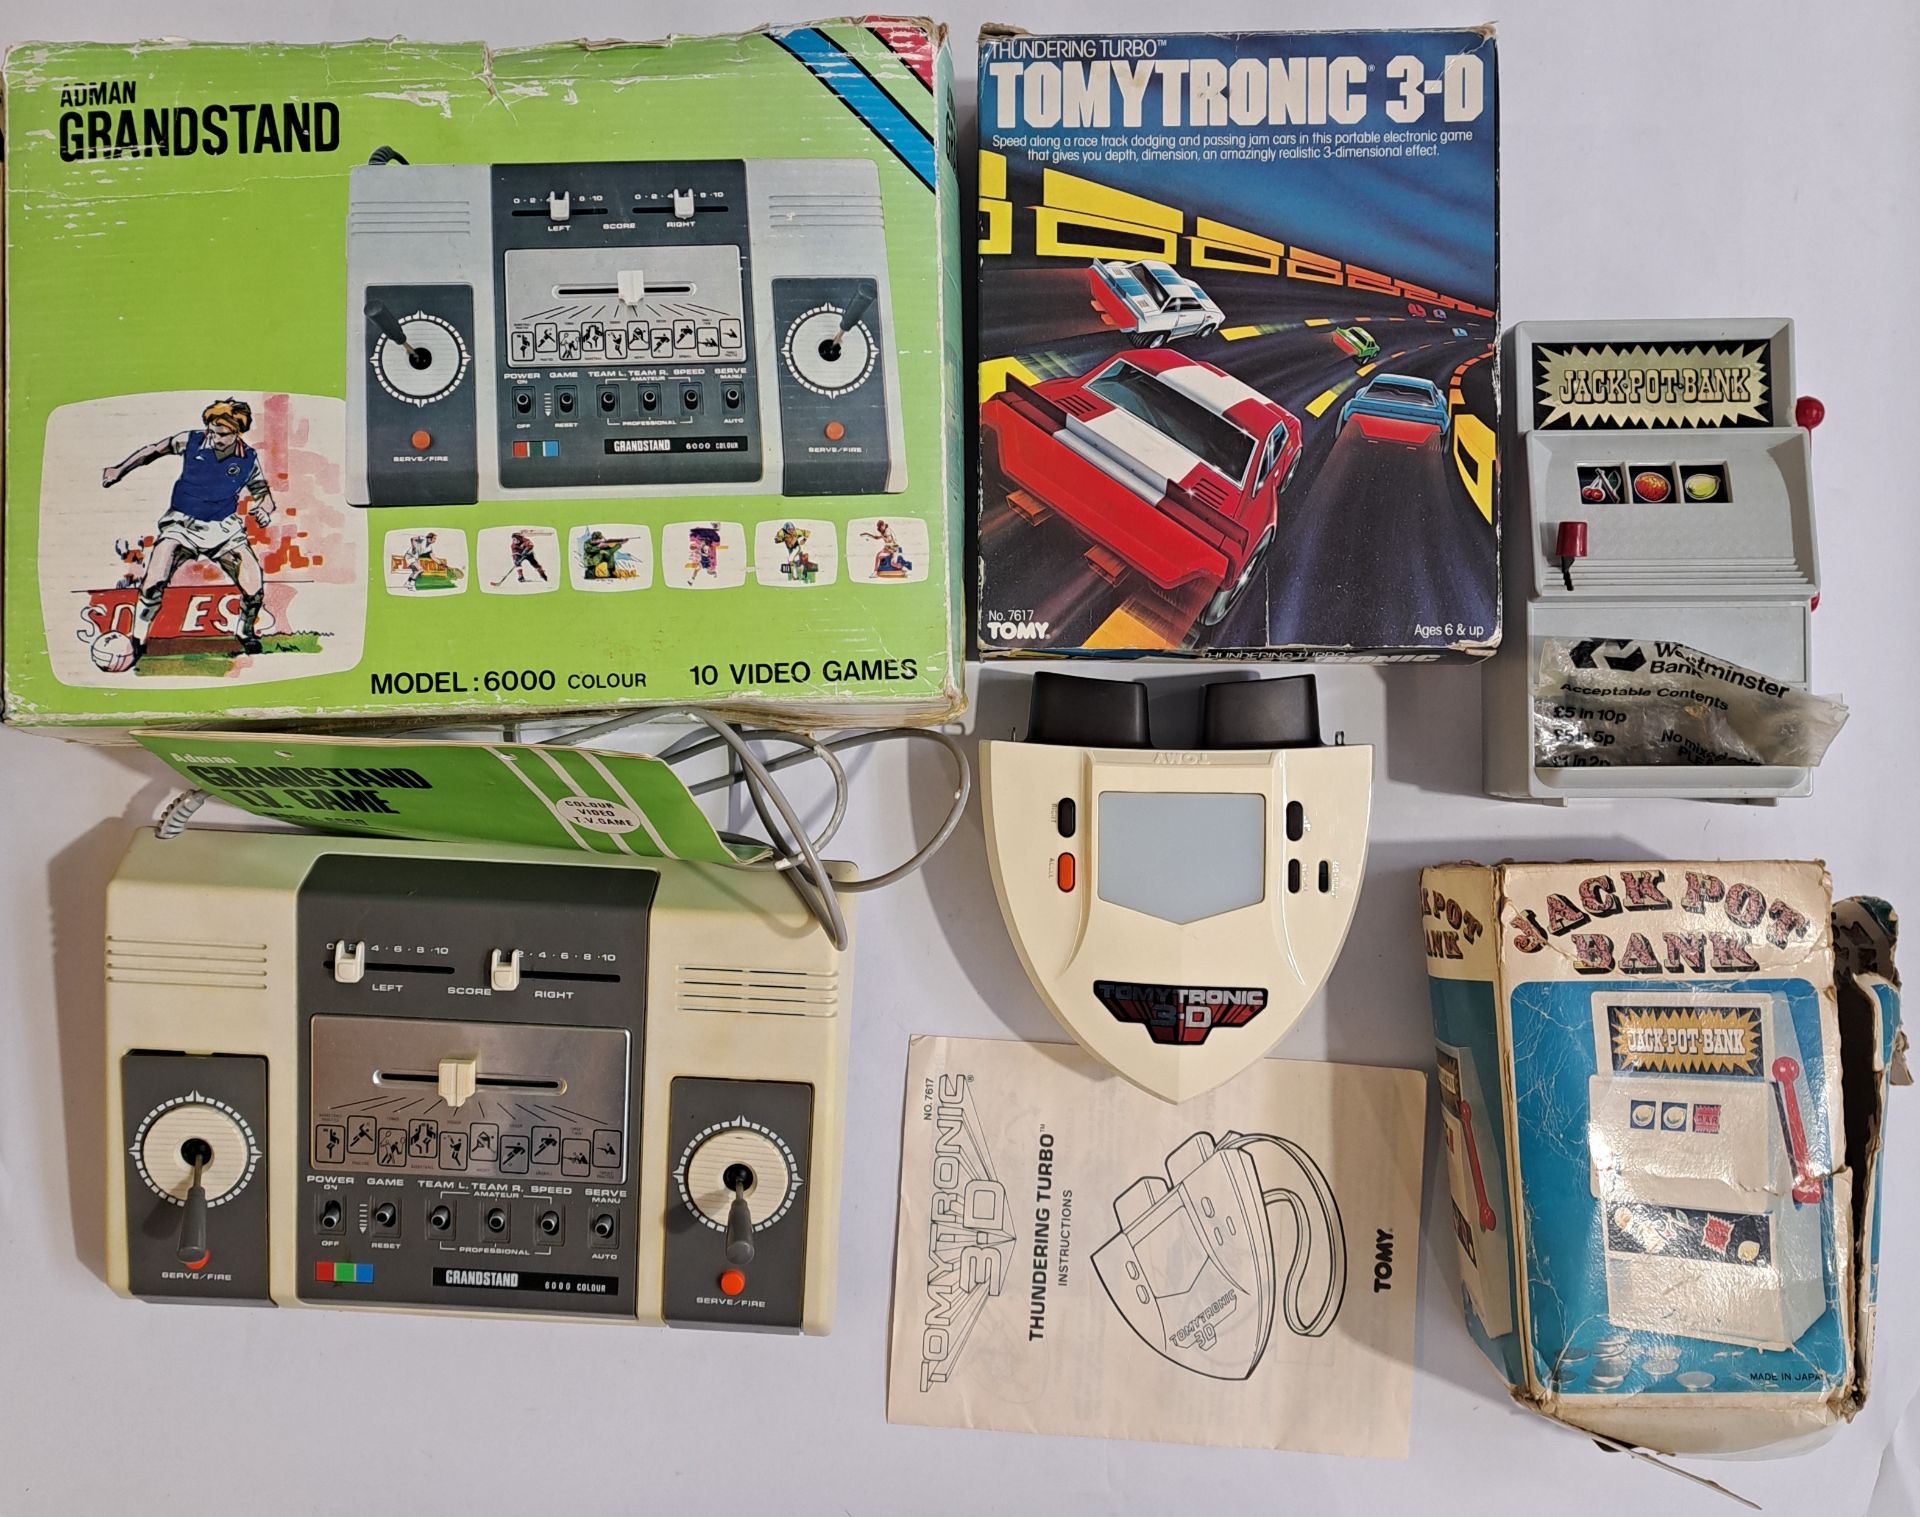 Vintage/Retro Gaming and similar comprising of a boxed Adman Grandstand 6000